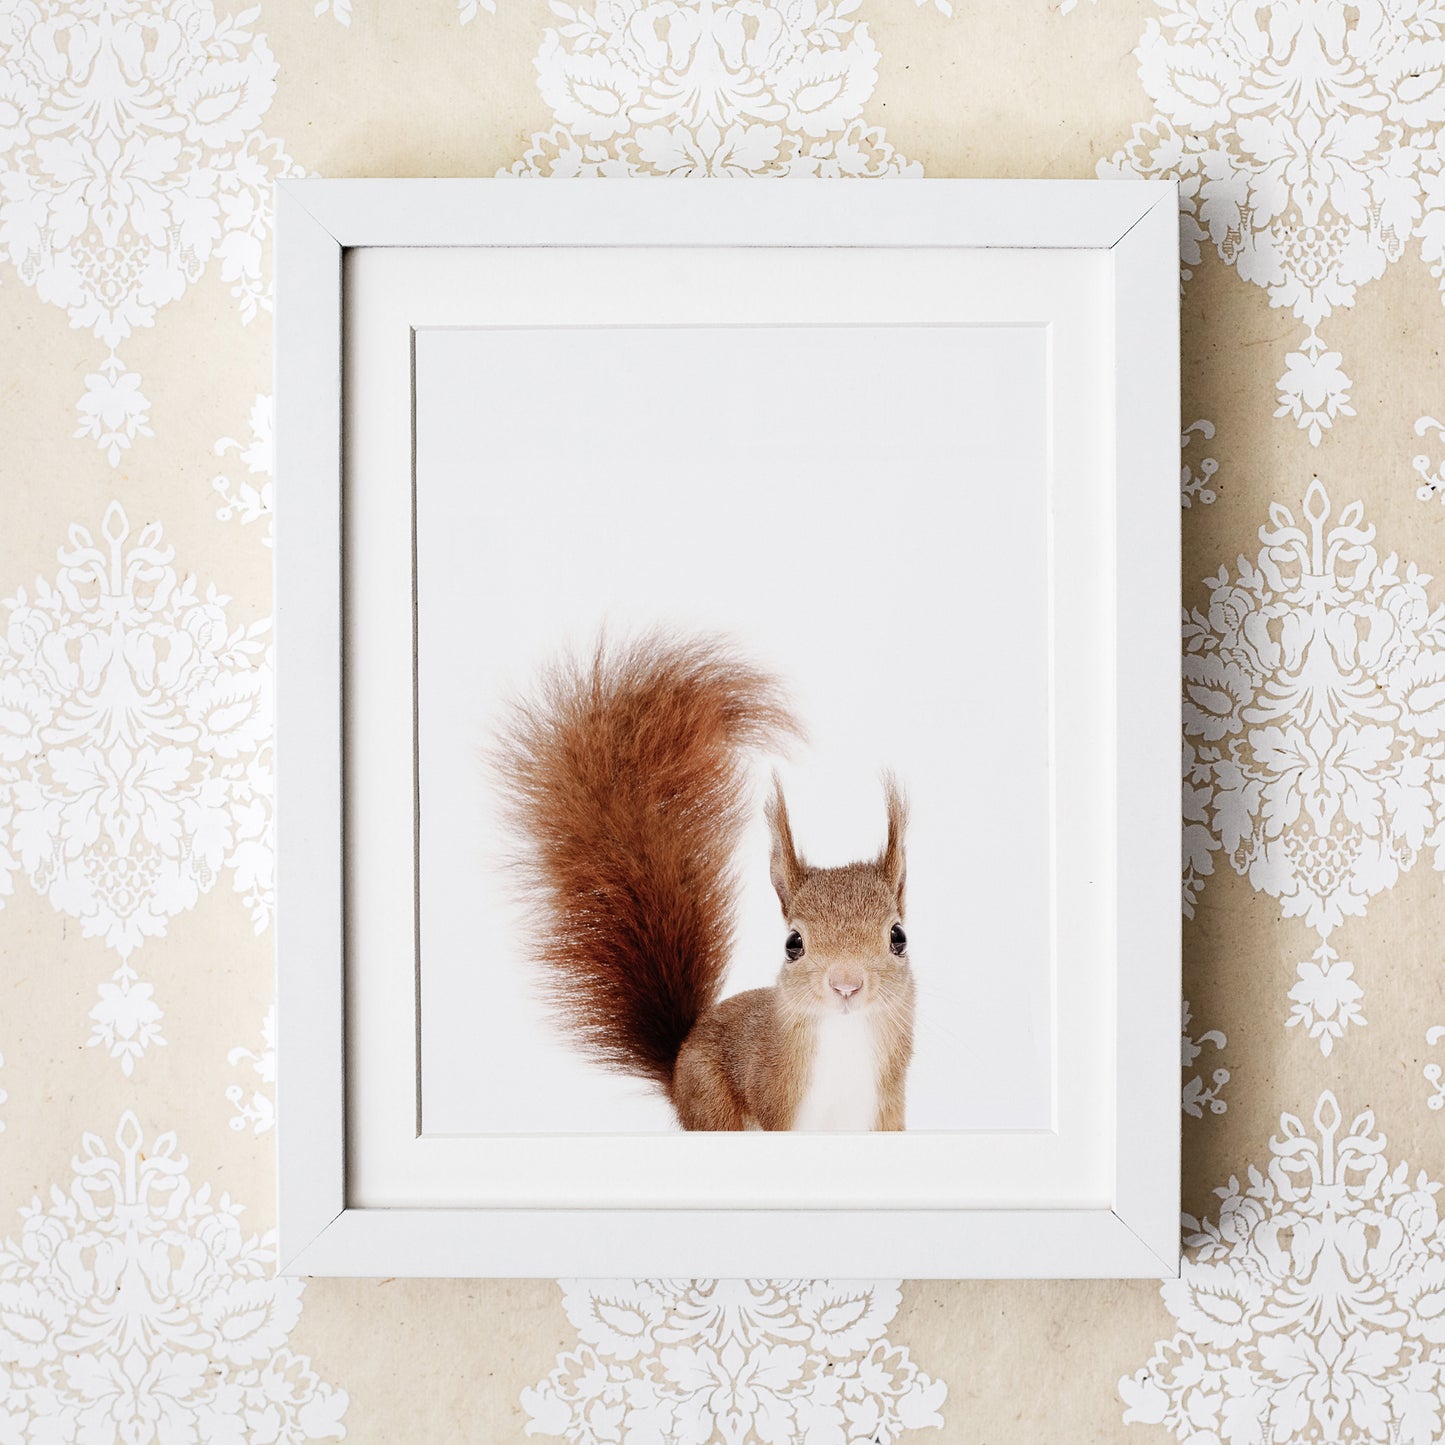 framed Baby Red Squirrel art print